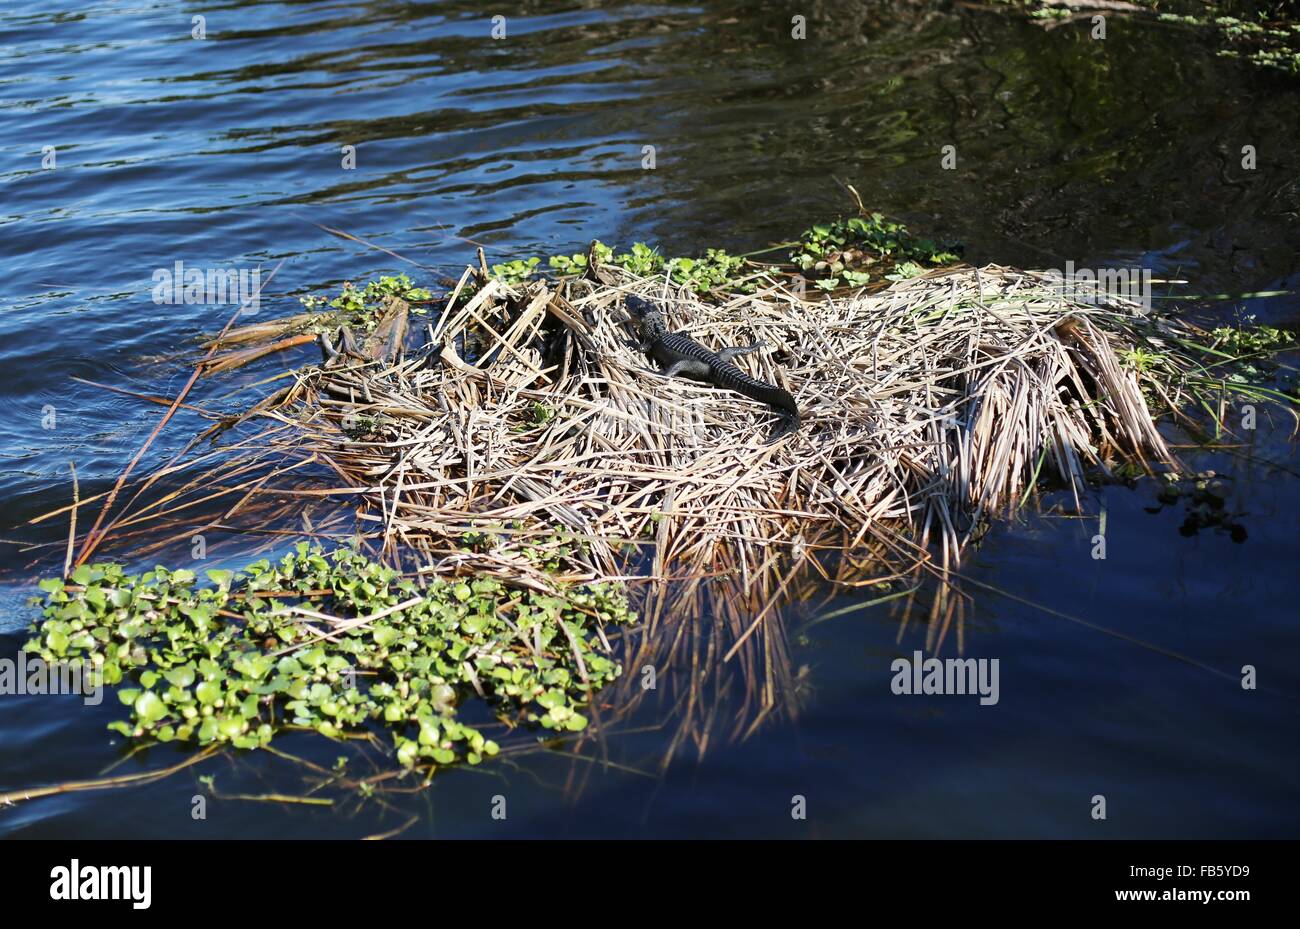 A small alligator basking in the sun at Boyd Hill Nature Preserve in St. Petersburg, Florida. Stock Photo